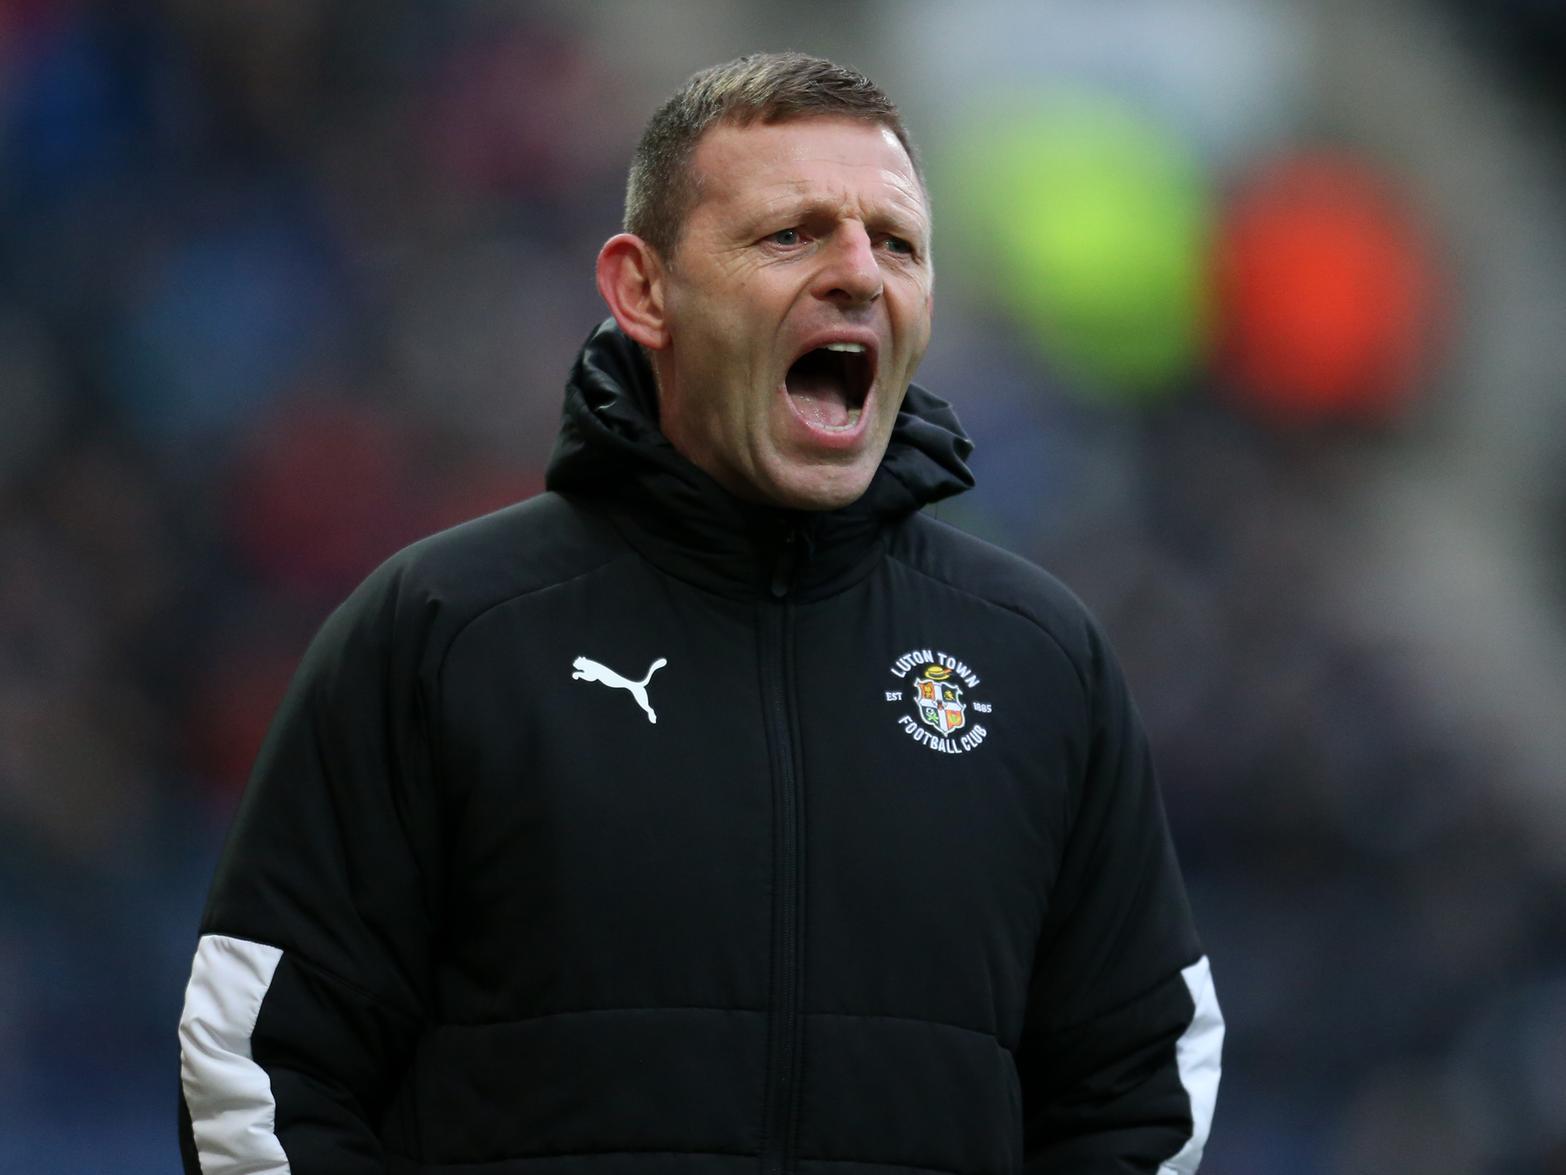 Luton Town boss Graeme Jones has claimed that the "players, staff, a board of directors and supporters all pulling in the same direction" will play an integral role in the side's hopes of avoiding relegation this season. (Luton Today)